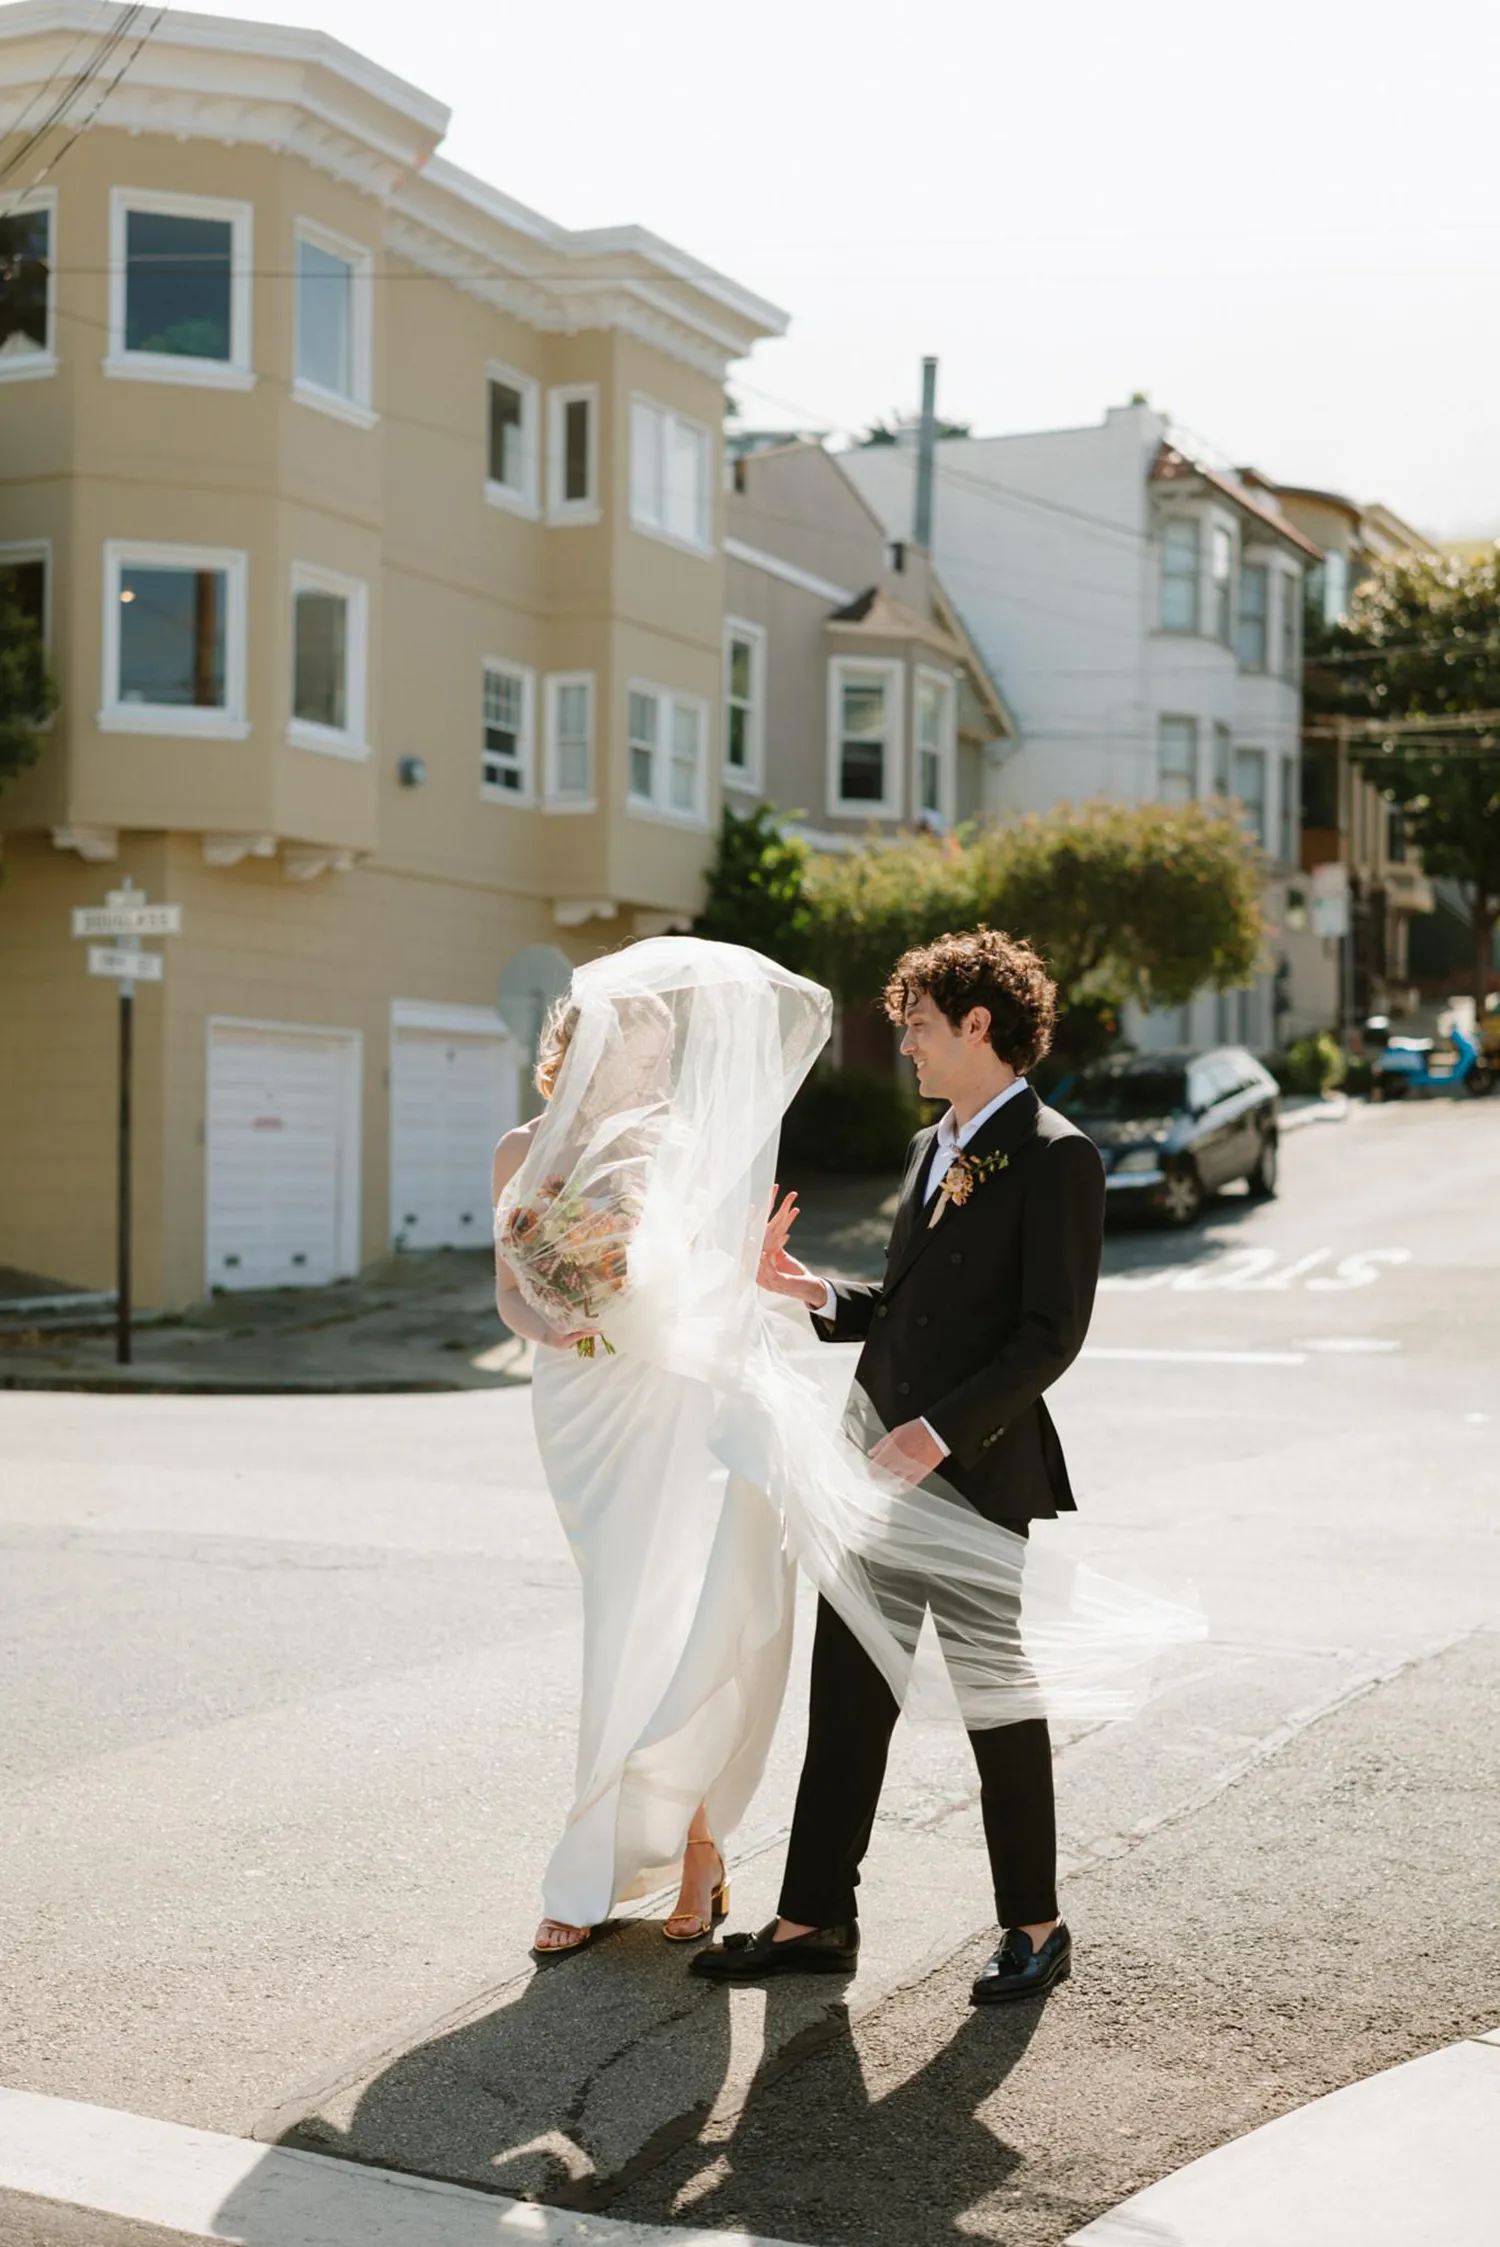 Top Wedding Photographers of 2024, featuring Lukas Korynta's work: A bride in a flowing dress with a delicate veil walks with her groom in a sharp suit across a city street, with classic San Francisco houses framing this candid, sunlit moment.